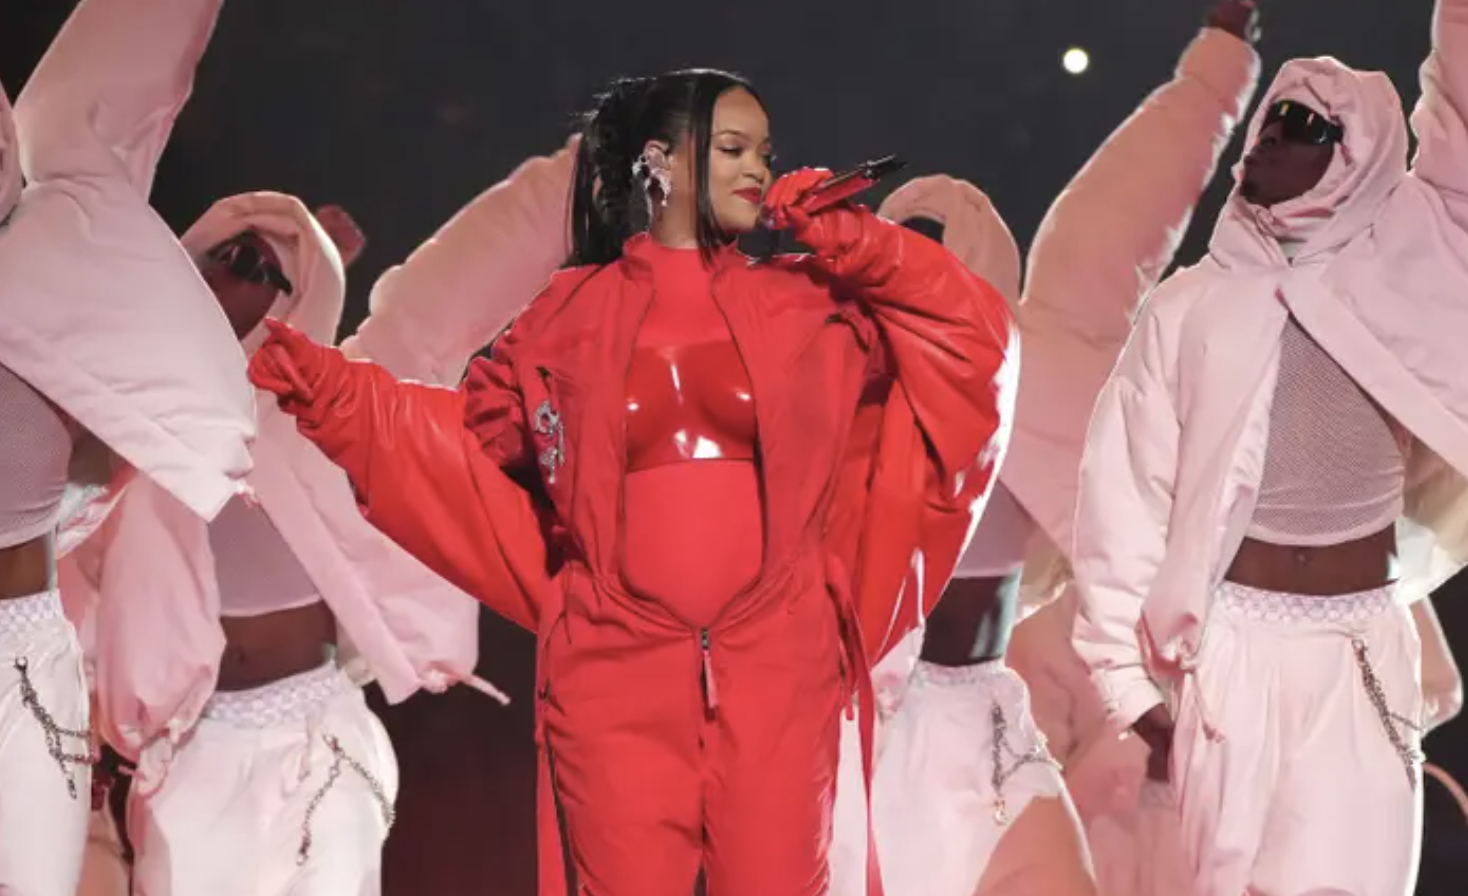 Rihanna at the super bowl halftime show in red